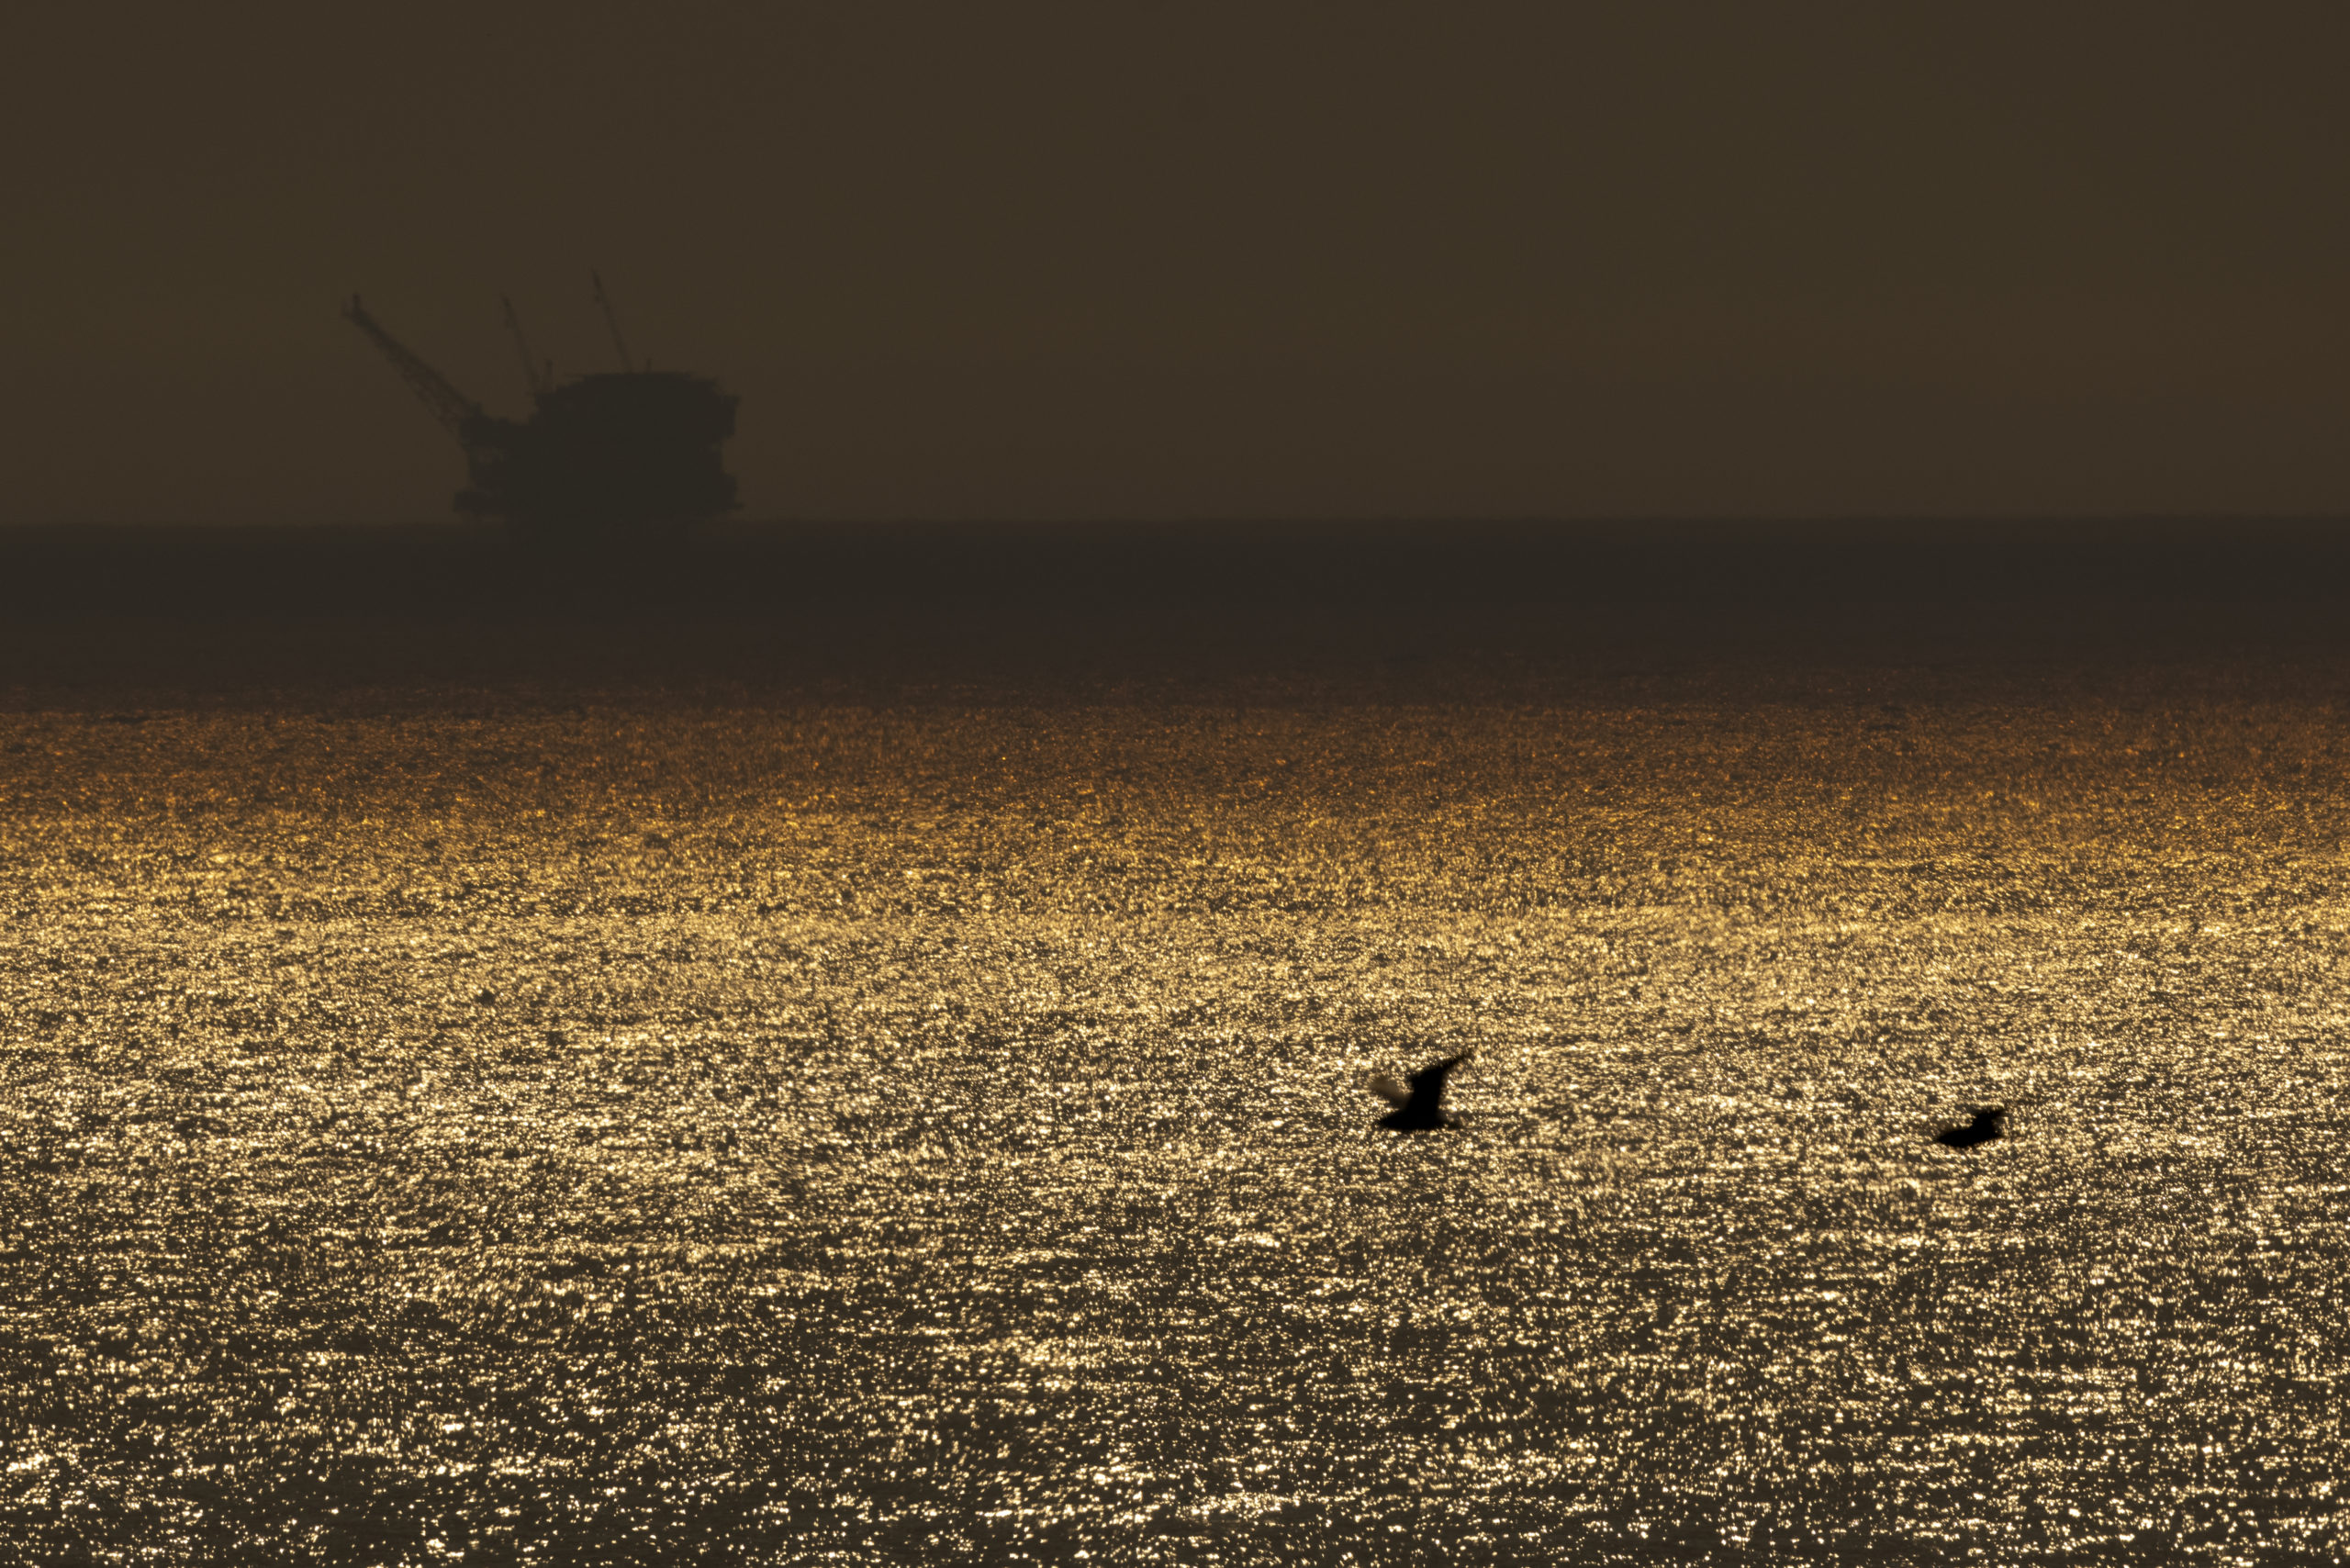 An offshore oil rig is pictured in the distance on Oct. 12 near Goleta, California. (David McNew/Getty Images)